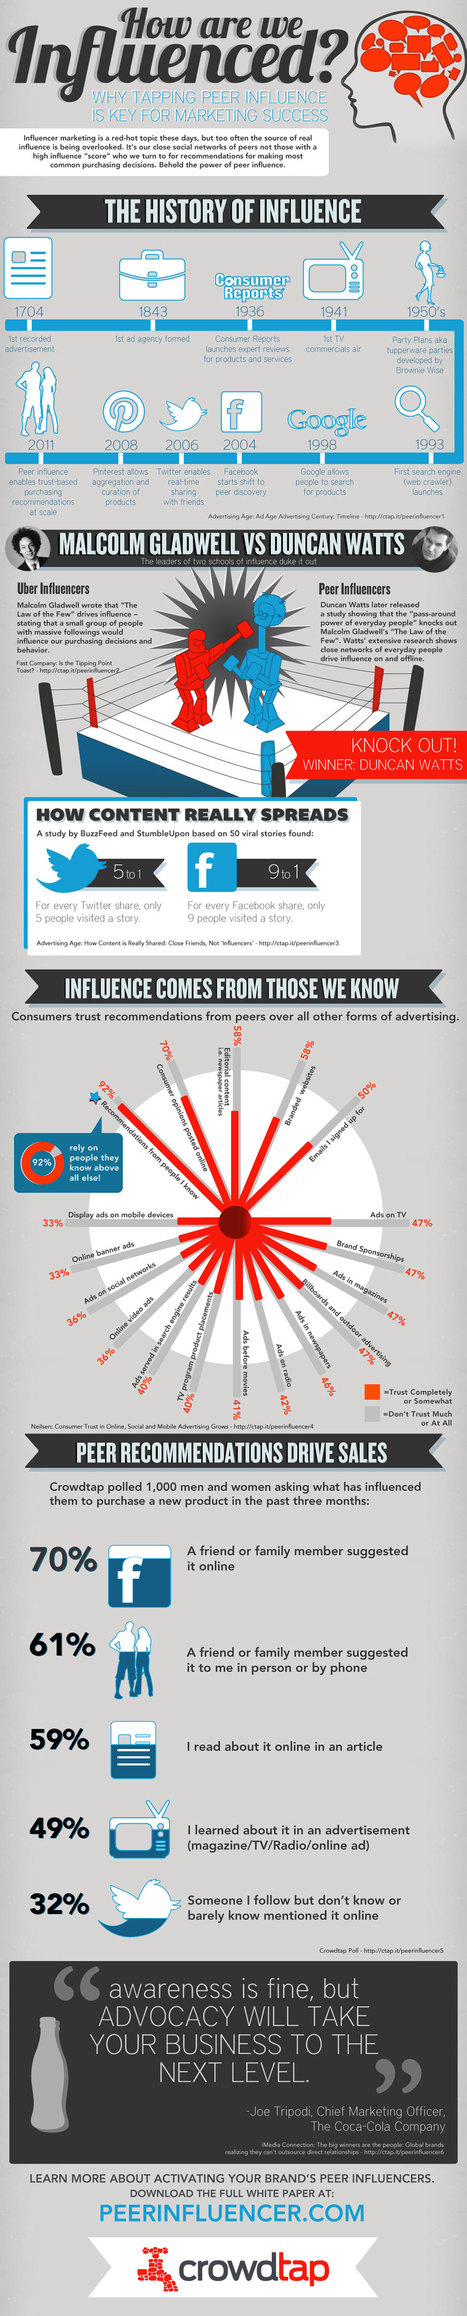 Who Are the Real Online Influencers? [INFOGRAPHIC] | Time to Learn | Scoop.it